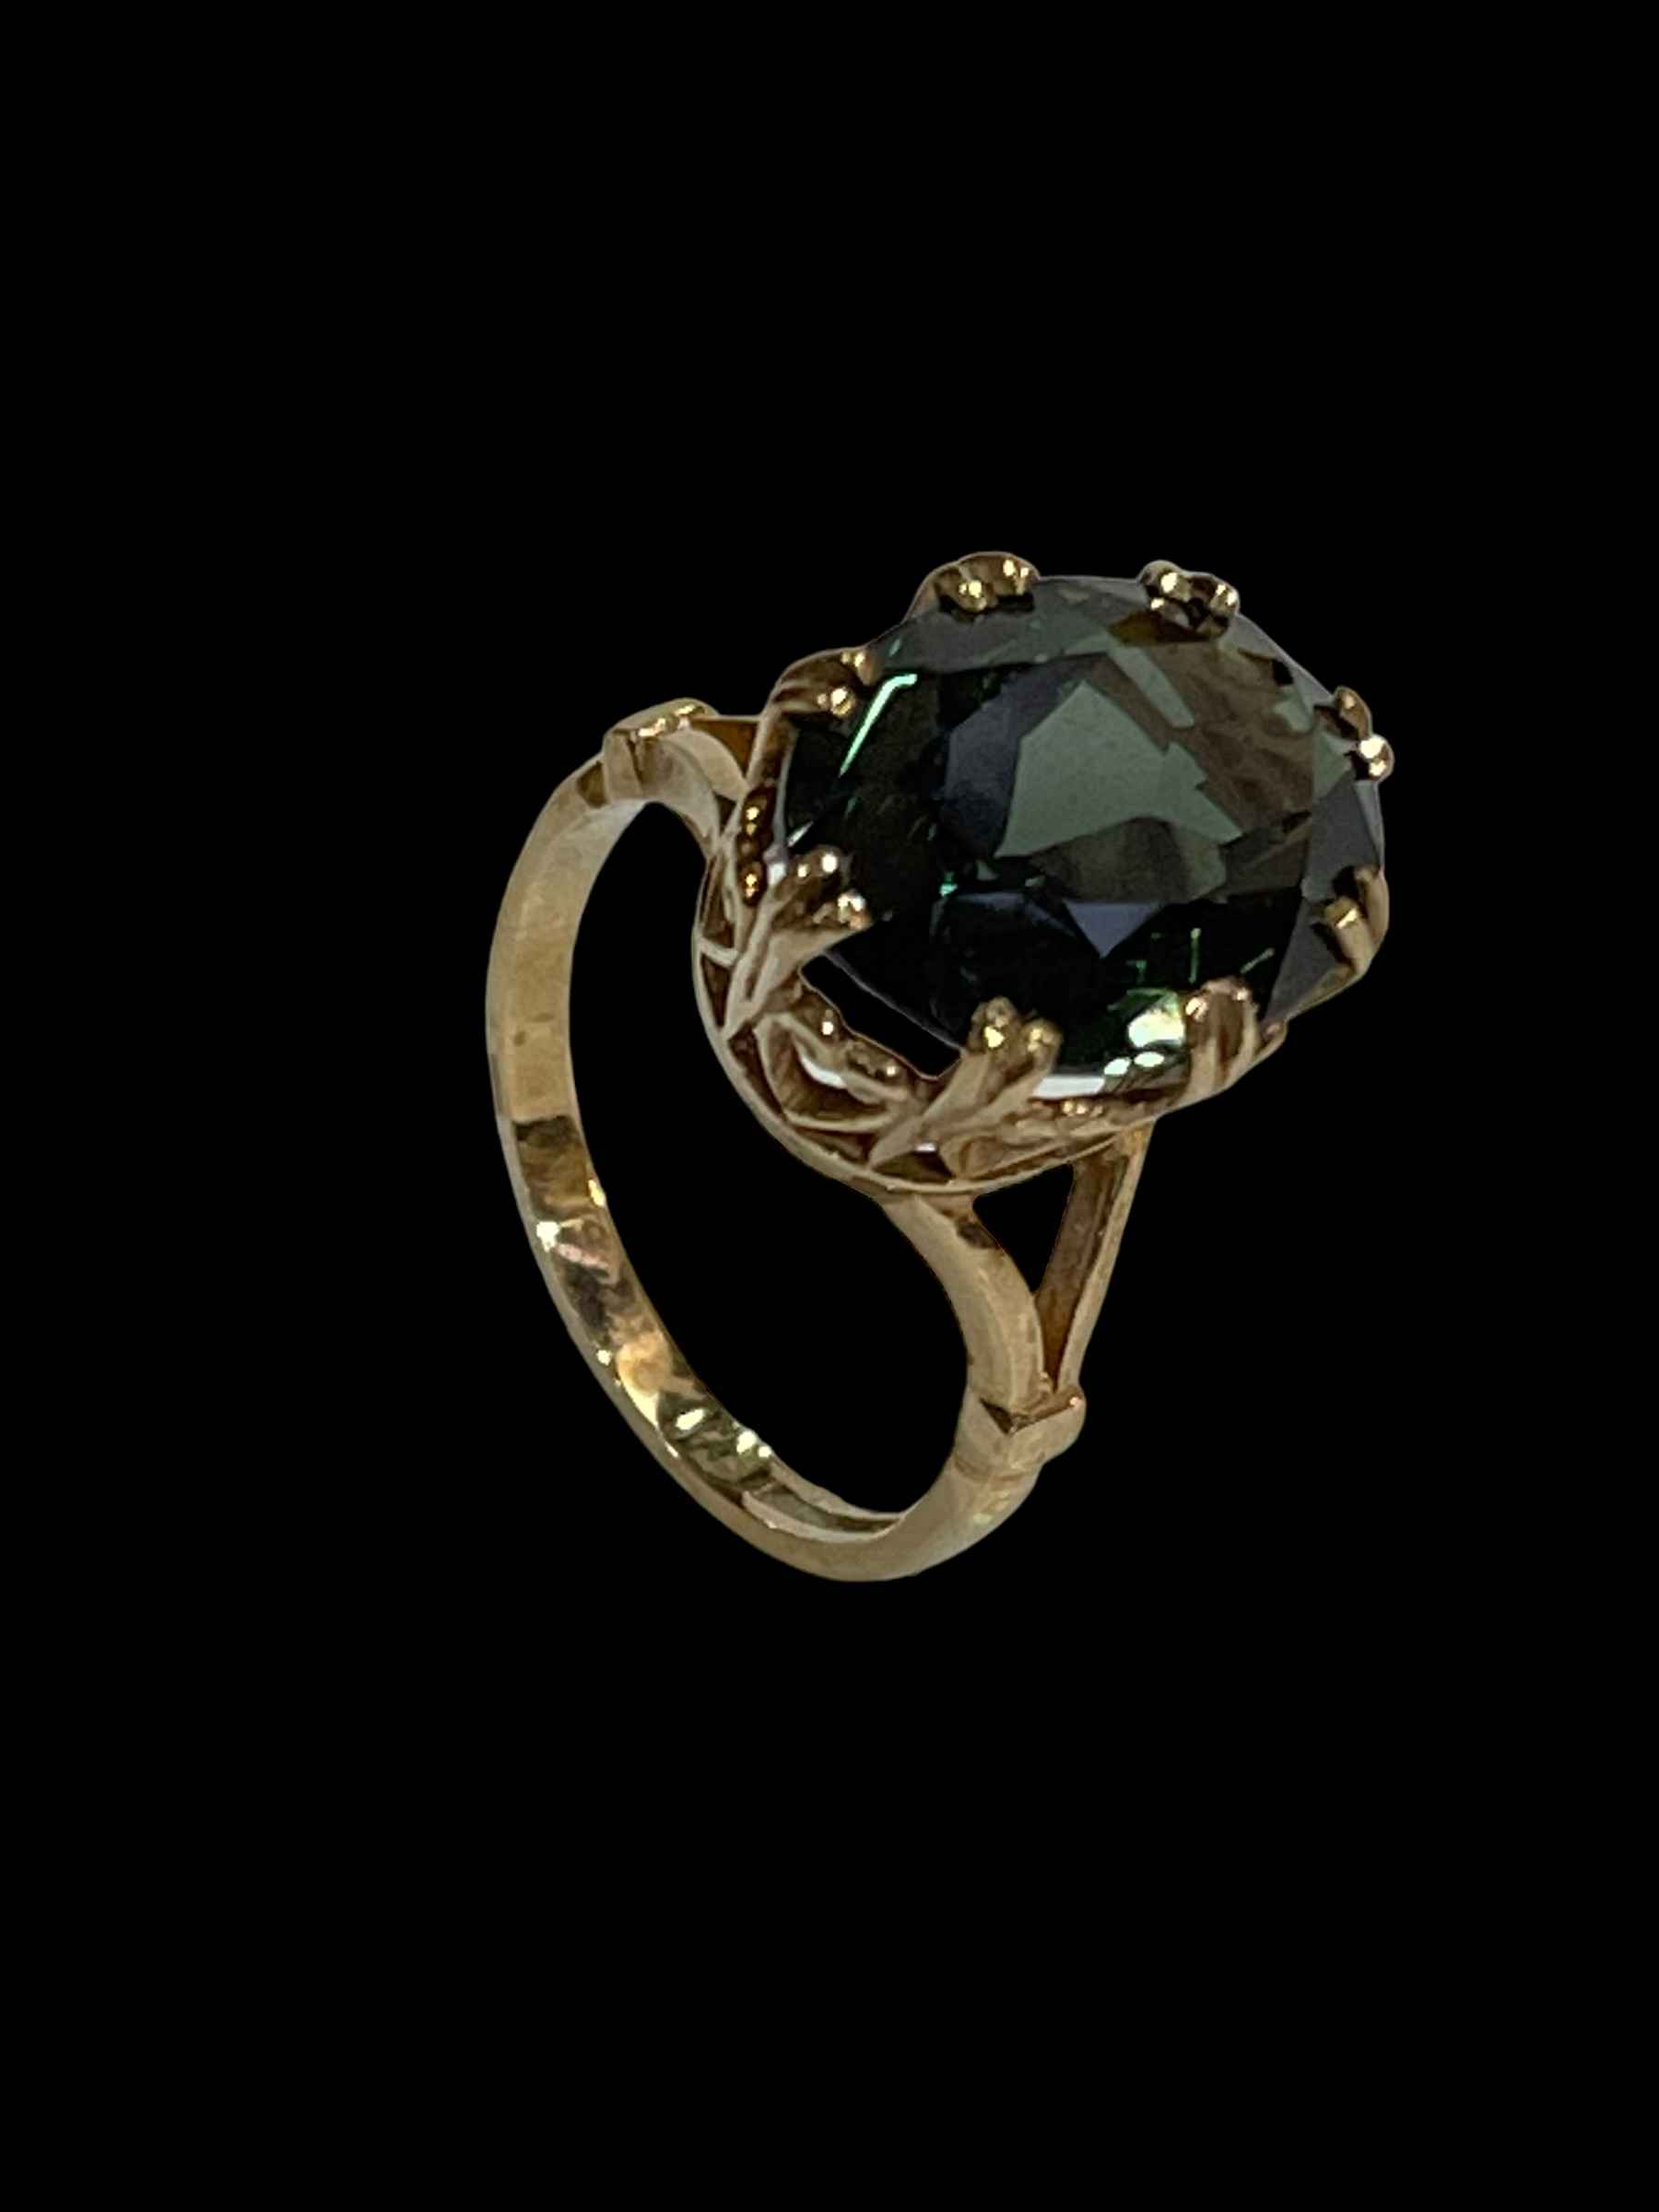 Green gemstone and 9 carat gold ring, size Q.